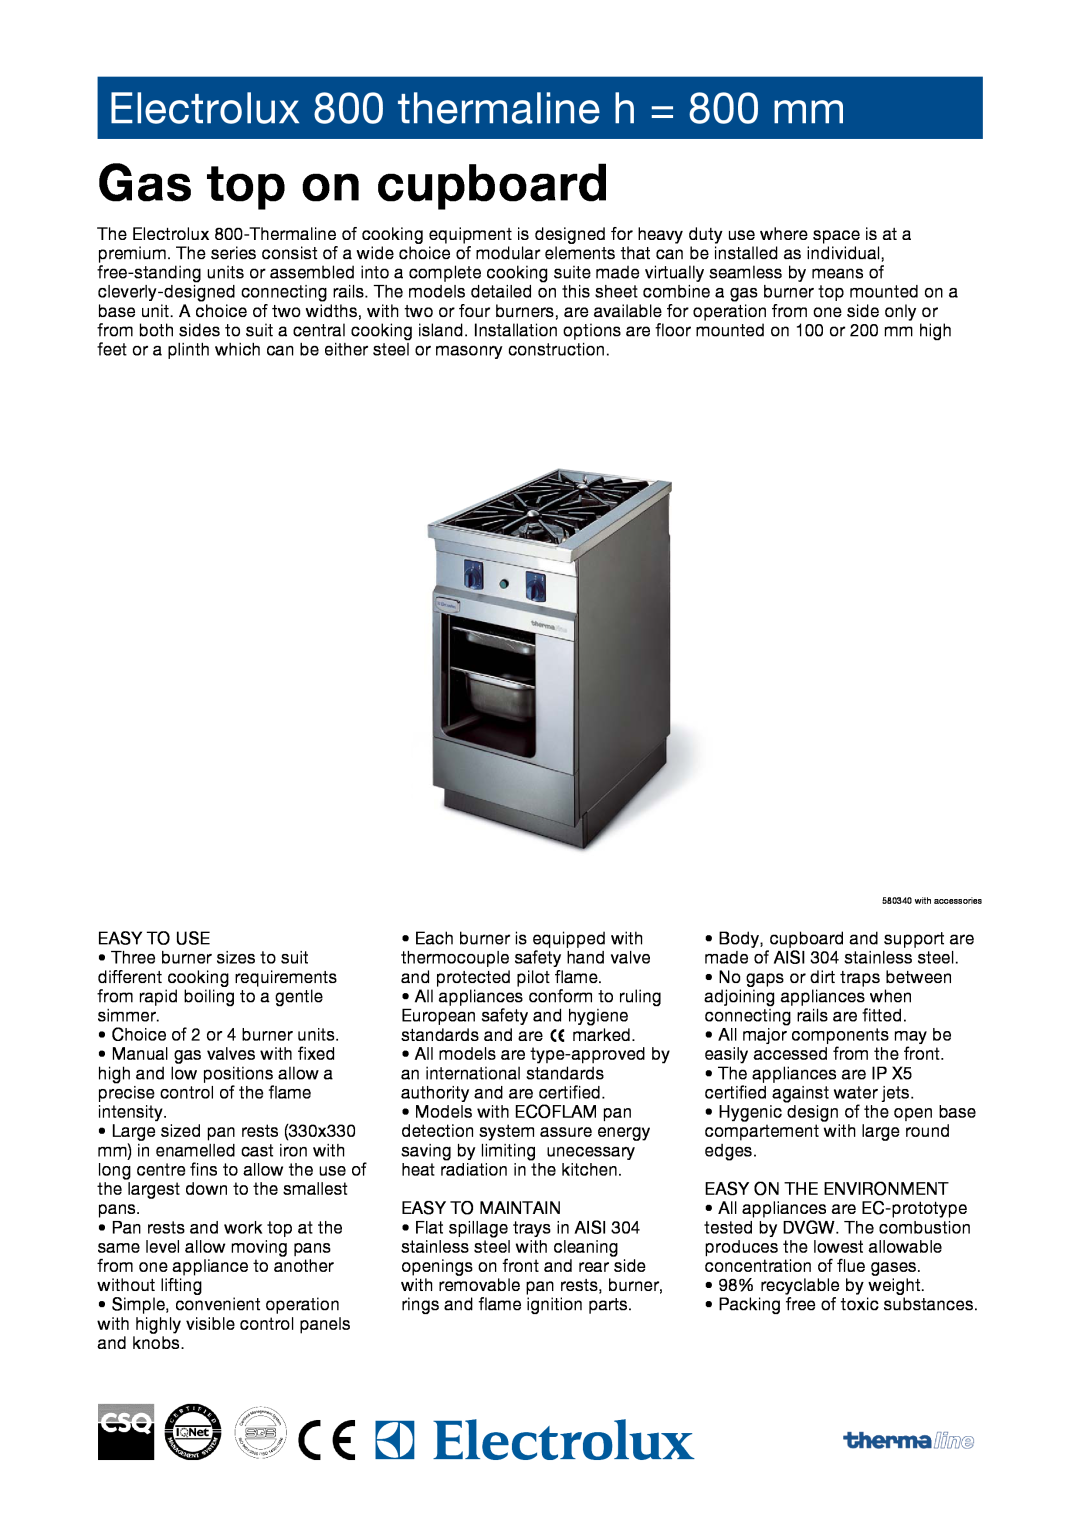 Electrolux manual Gas top on electric oven, Electrolux 800 thermaline h = 800 mm 